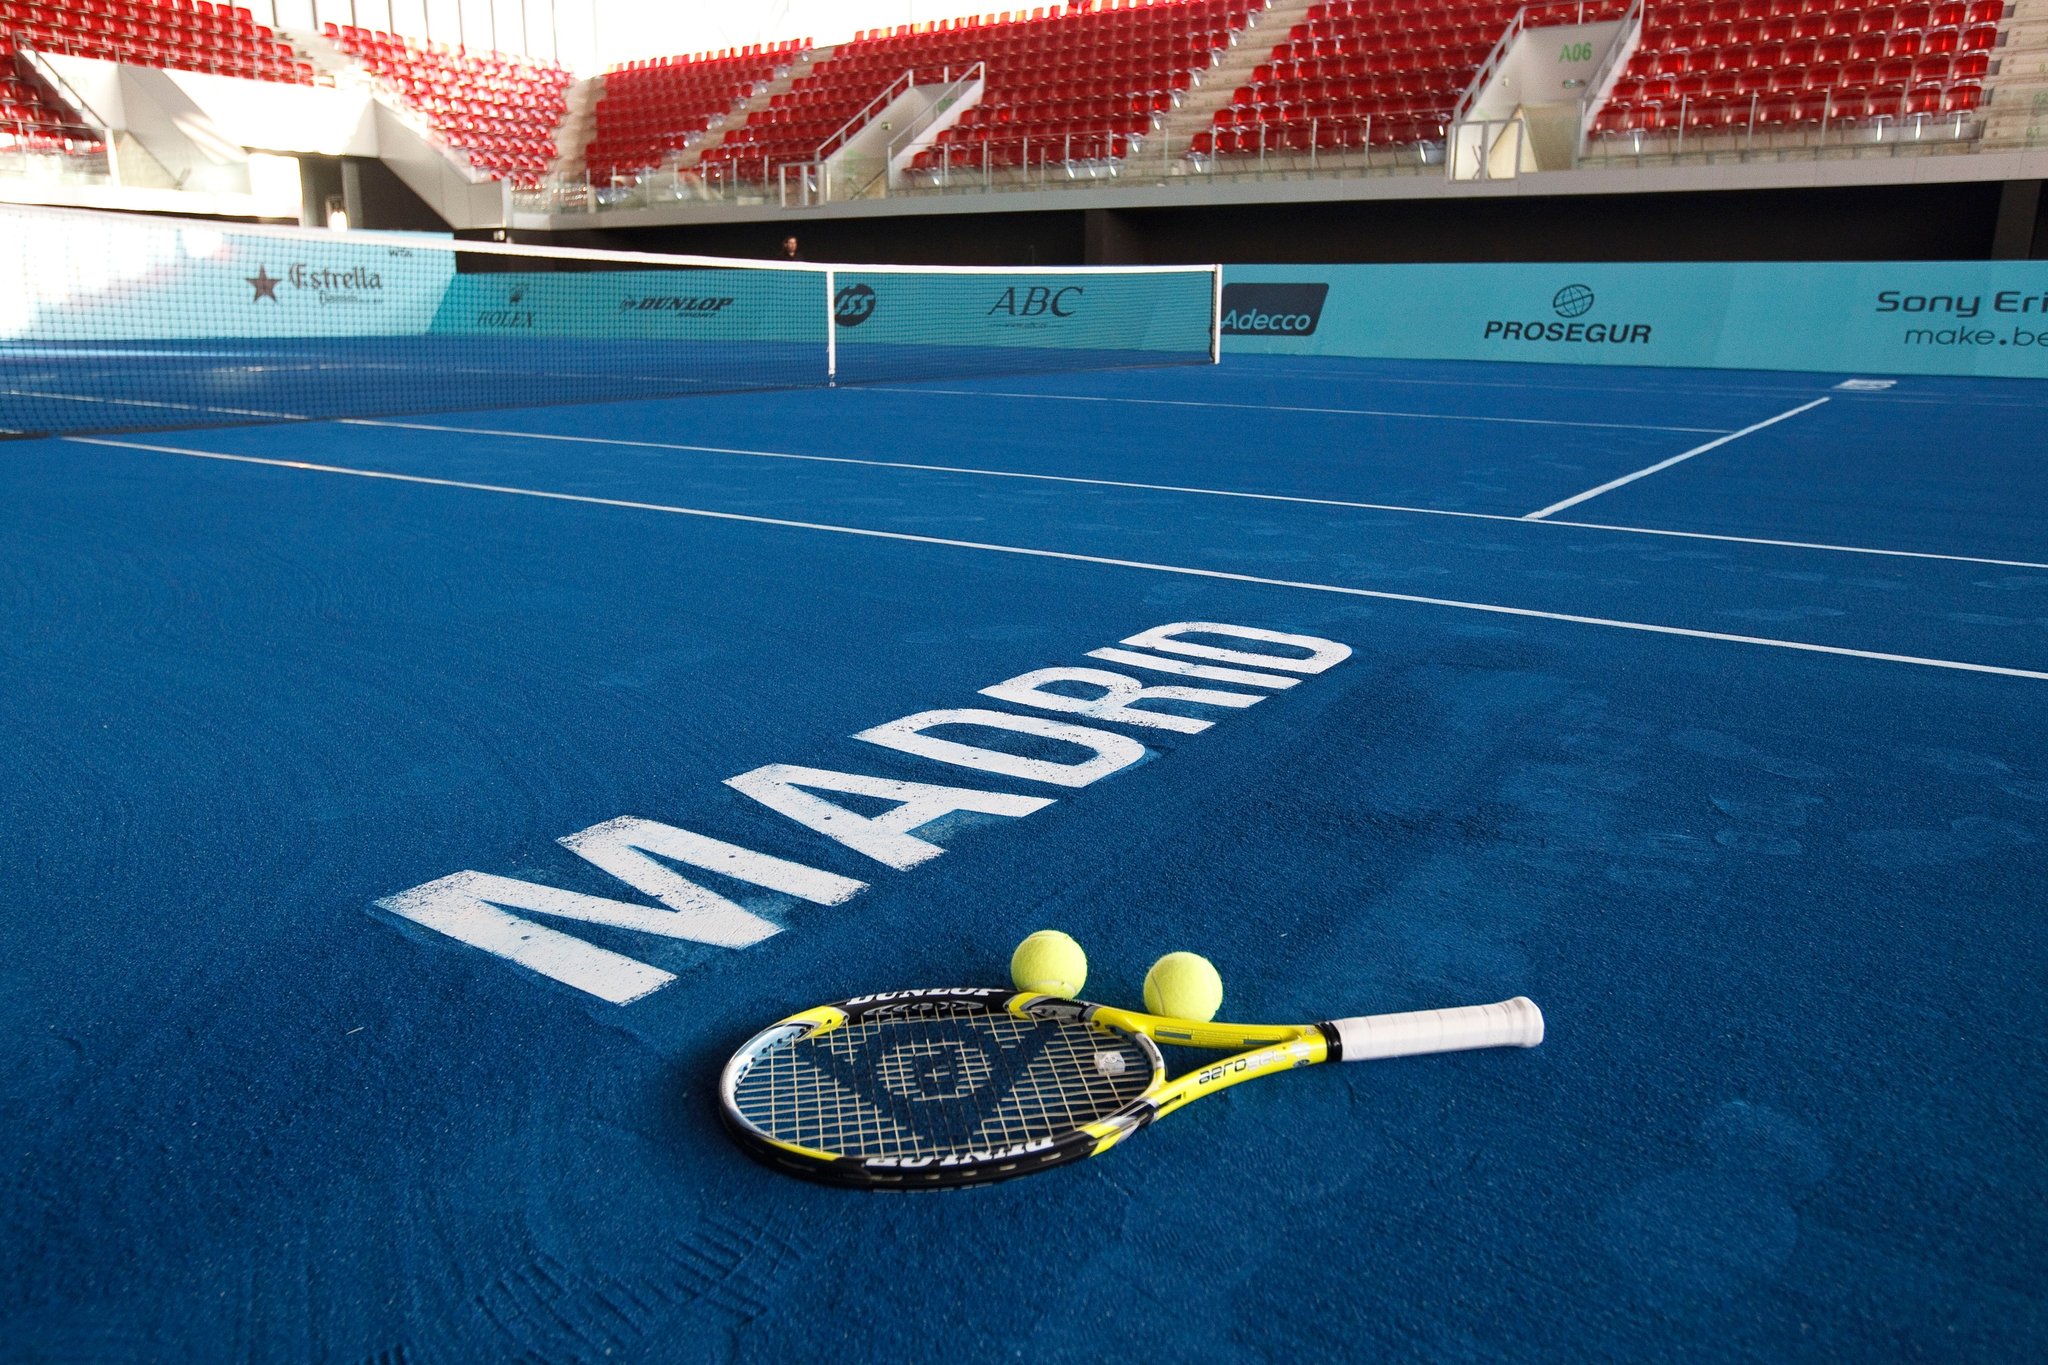 Tennis court and venue in Madrid, Spain before a practice session.